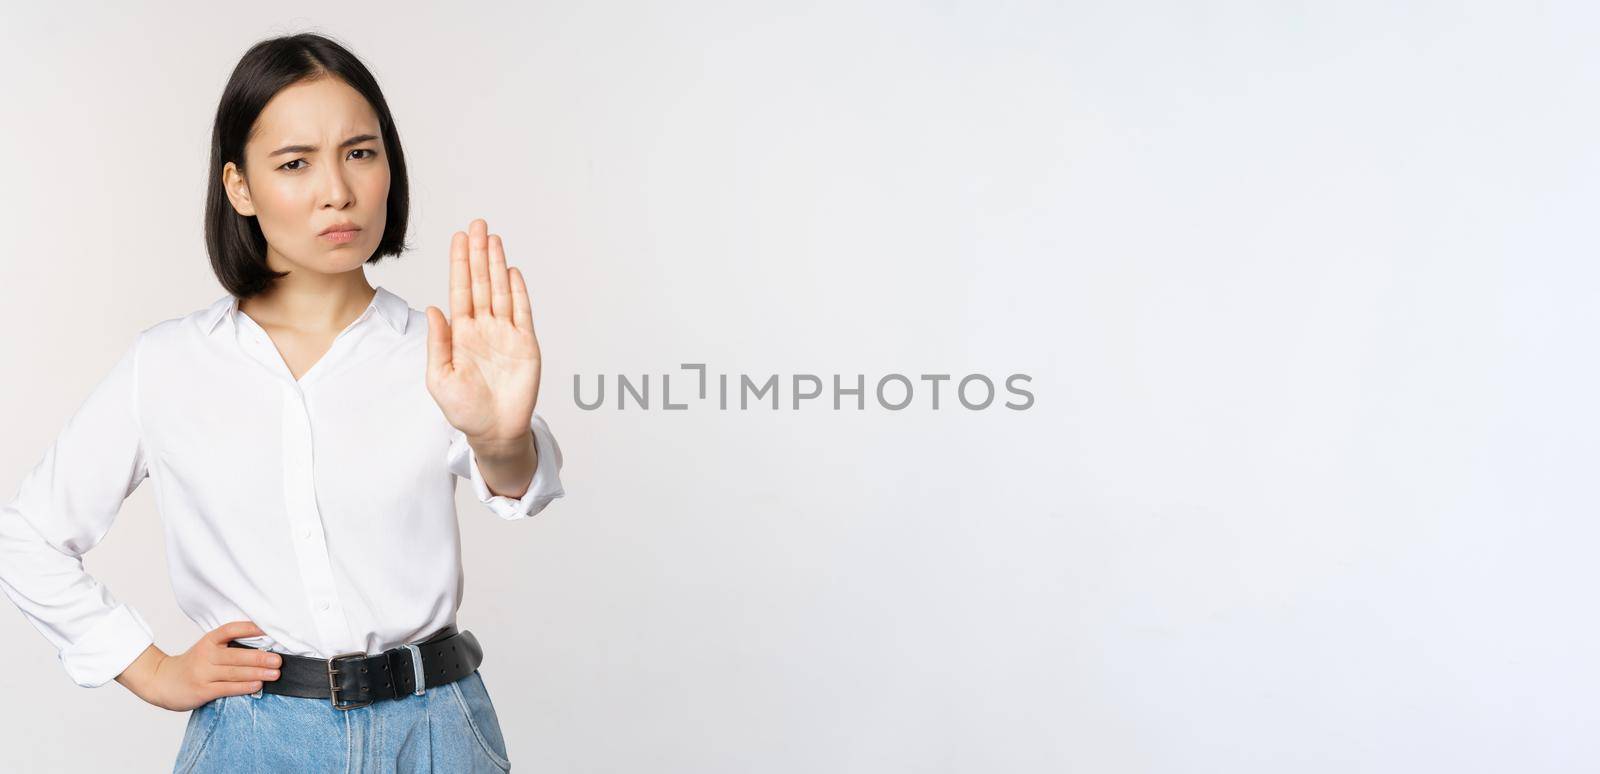 Portrait of young woman extending one hand, stop taboo sign, rejecting, declining something, standing over white background. Copy space